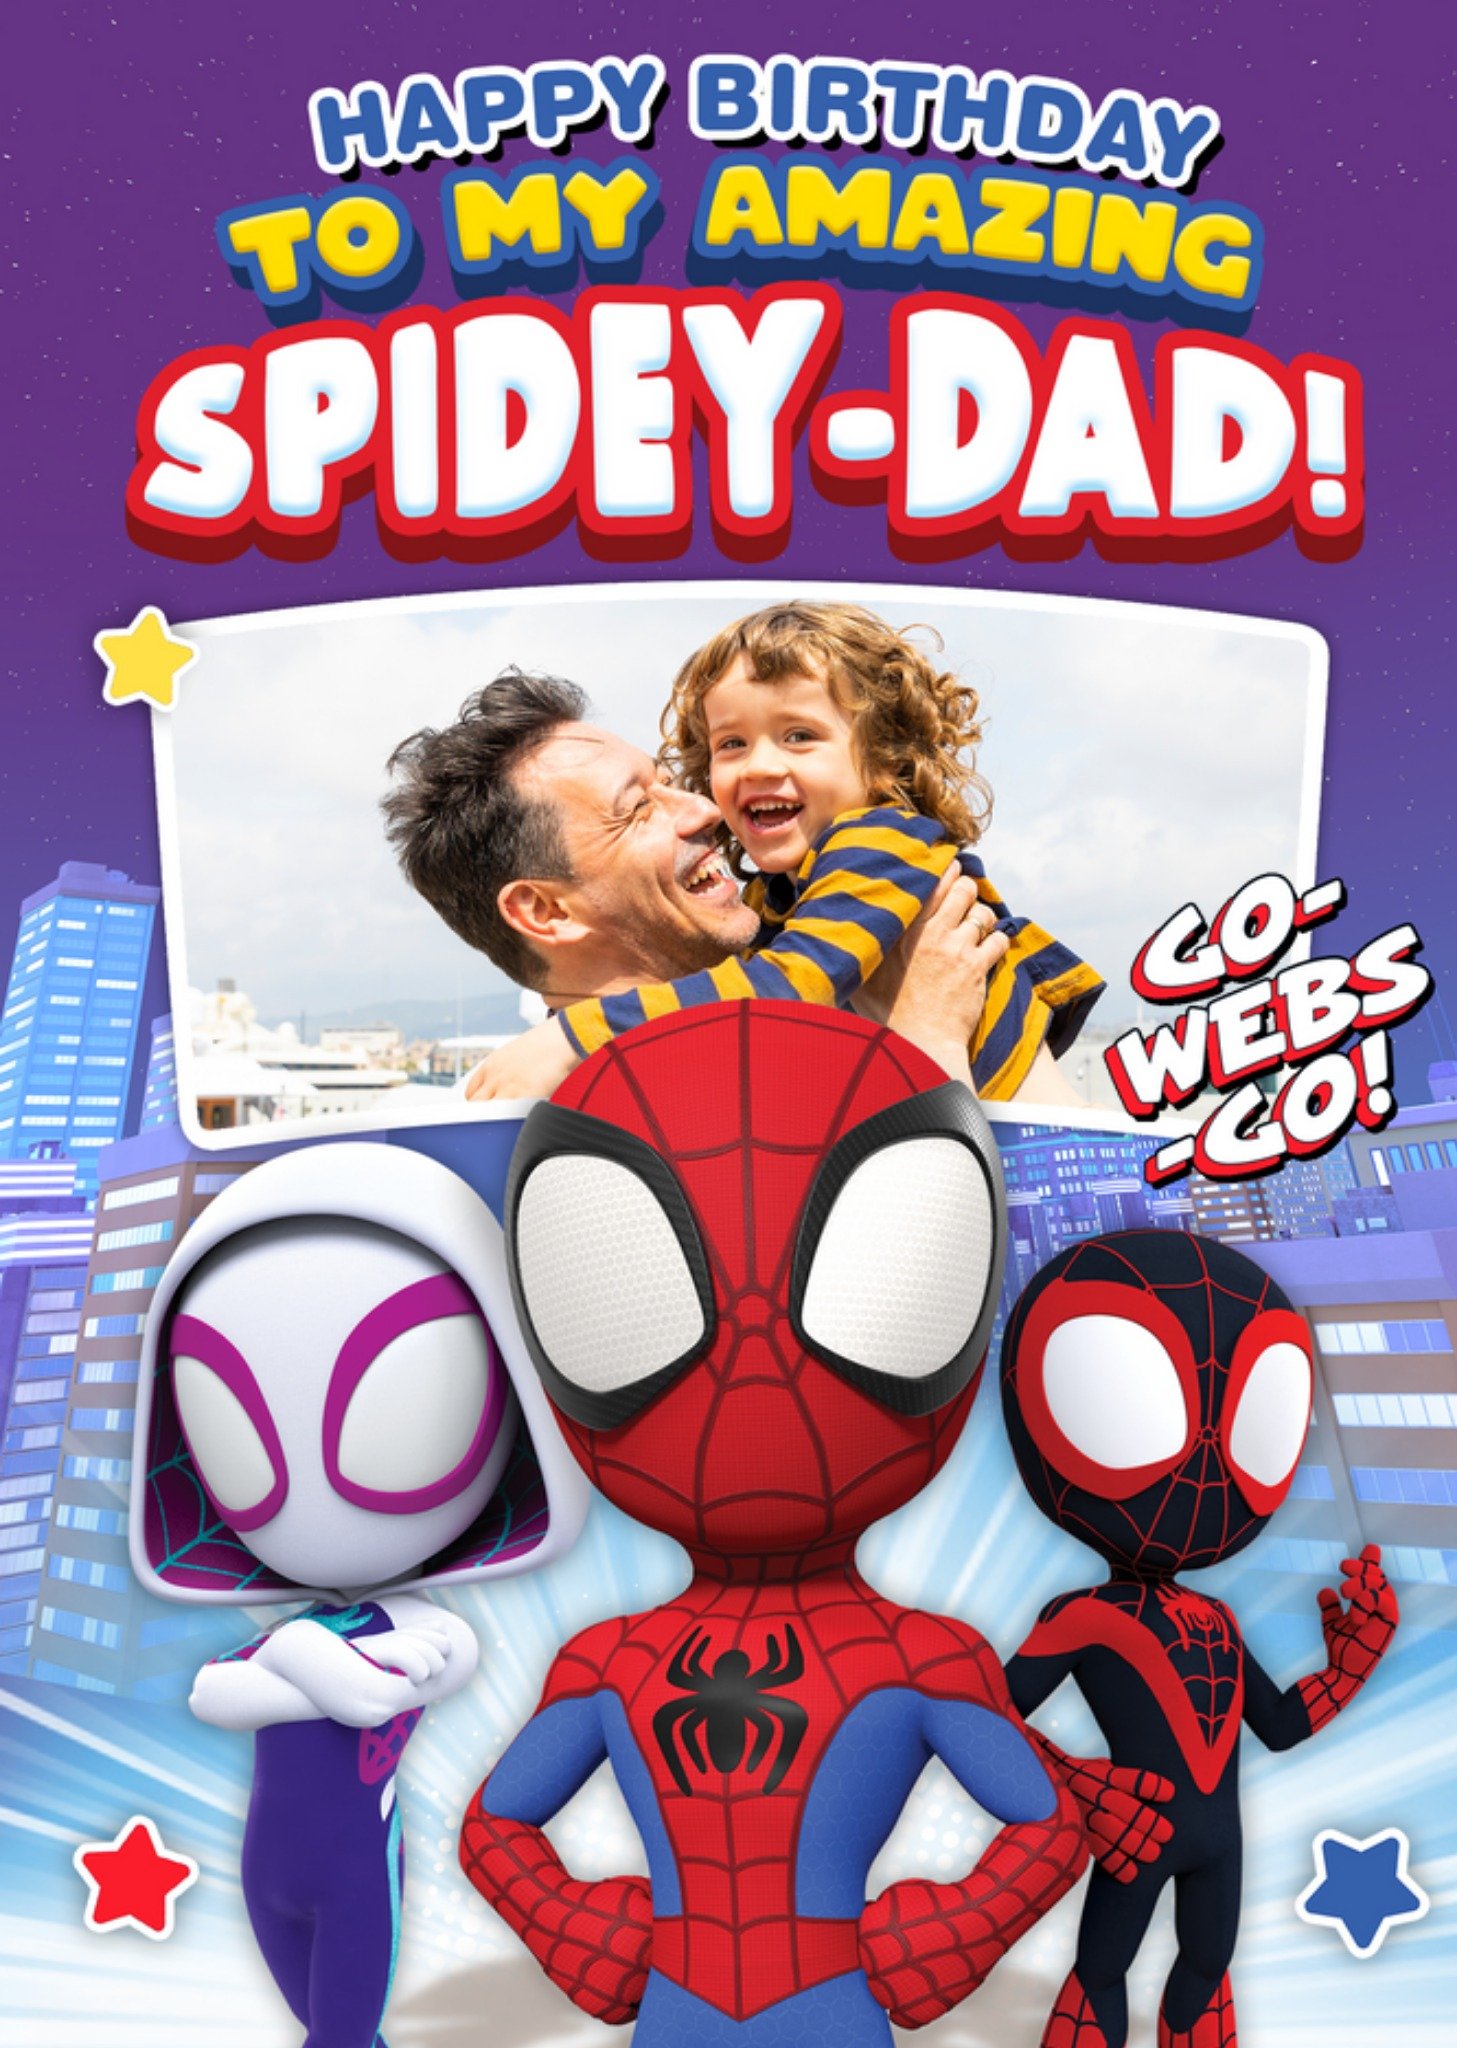 Spiderman Spidey And His Amazing Friends Photo Upload Spidey-Dad Birthday Card, Large